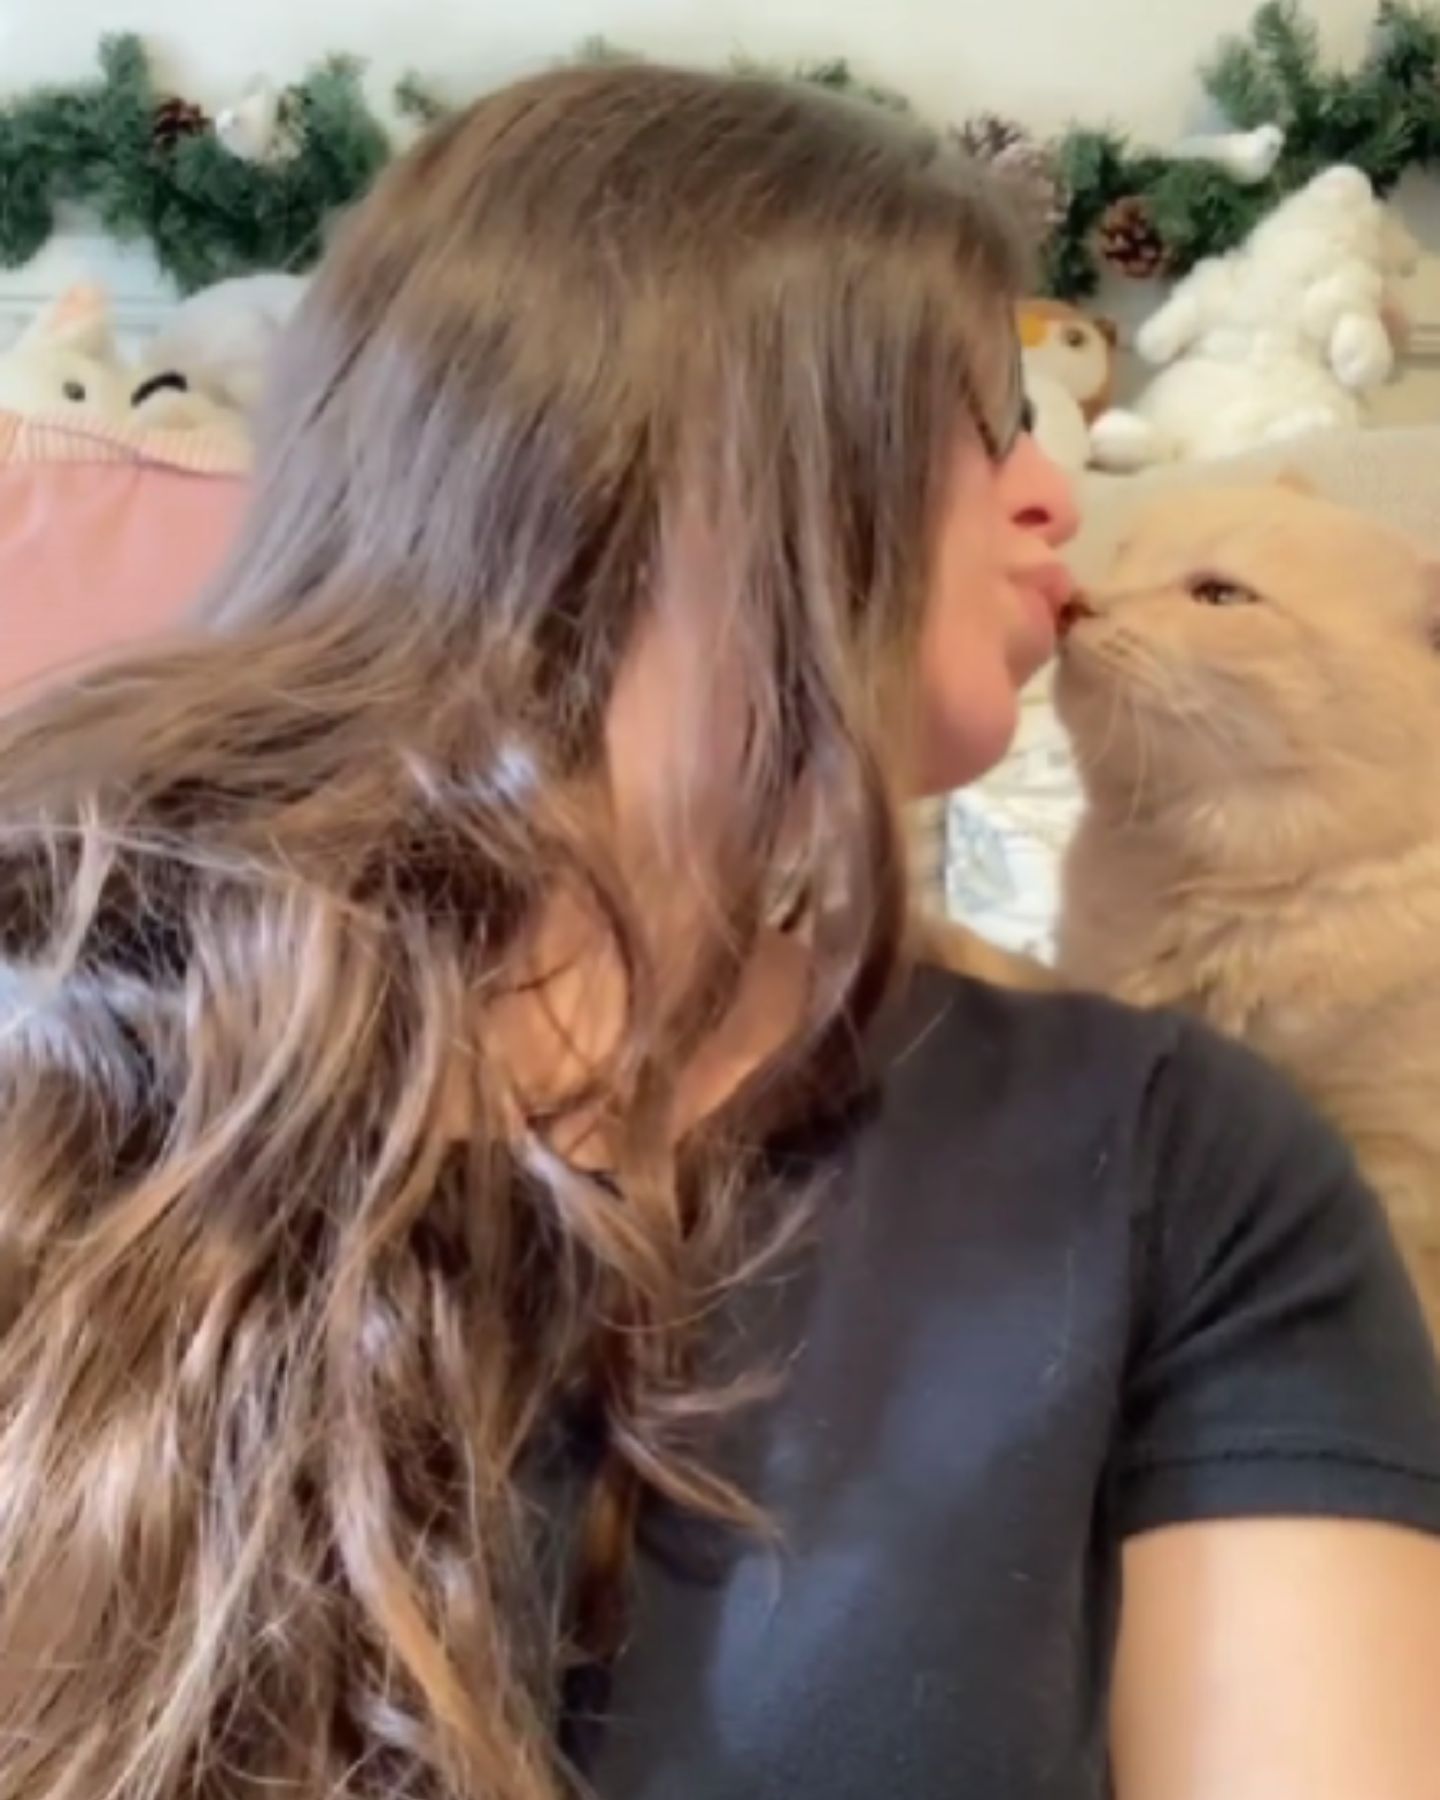 woman giving cat a kiss